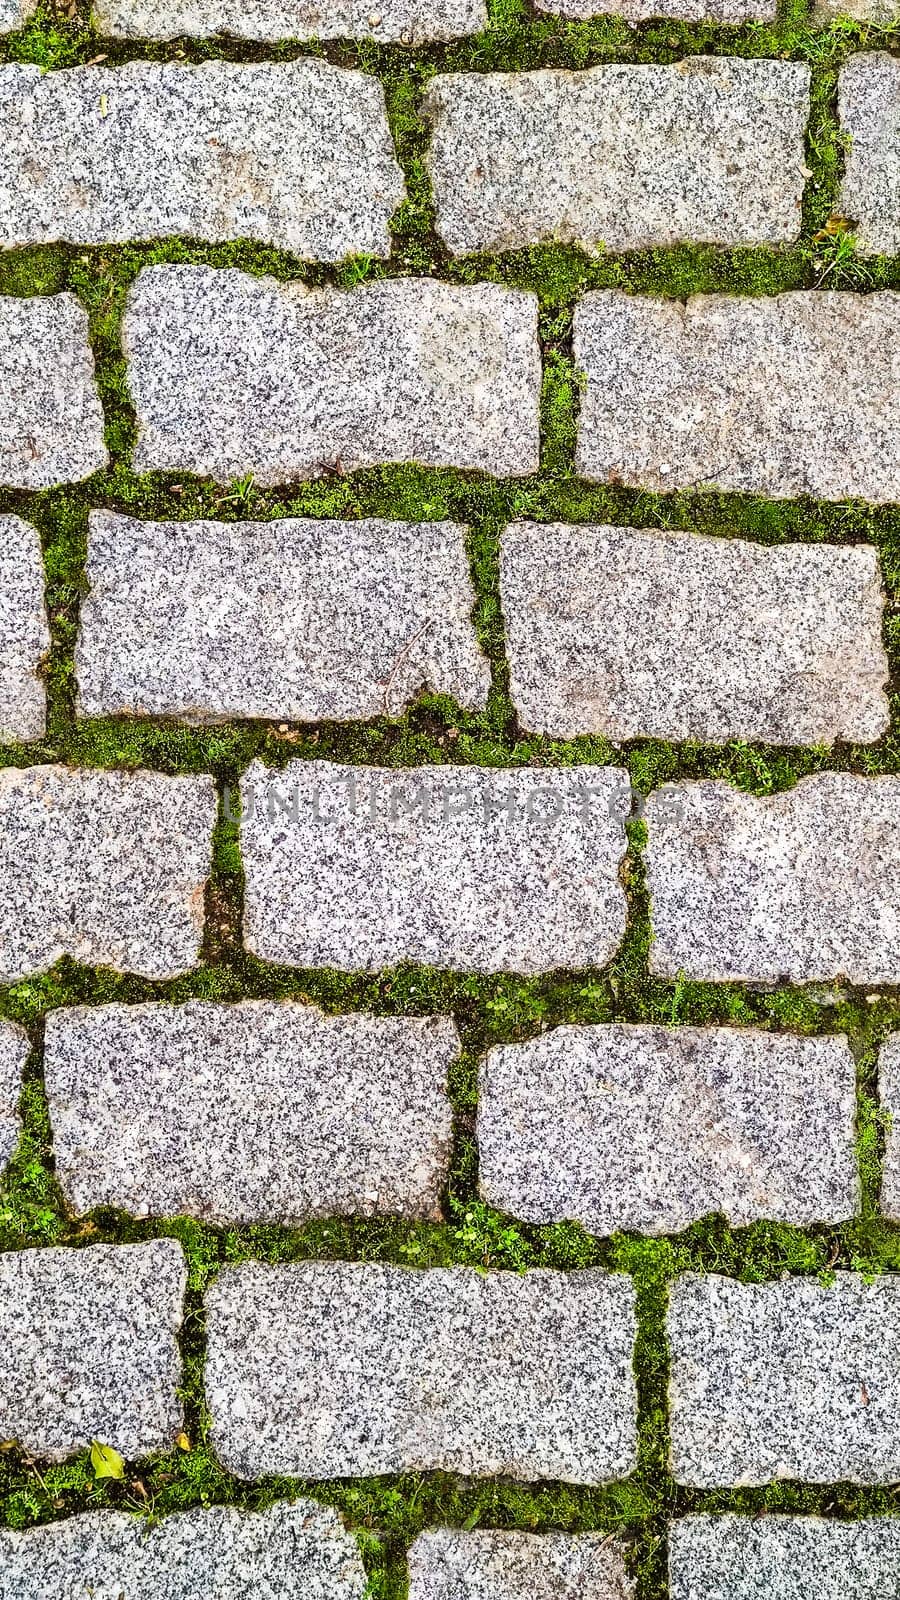 Green grass sprouted between bricks of cobblestone path, top view. Concept of harmonious fusion of city and nature. by Laguna781